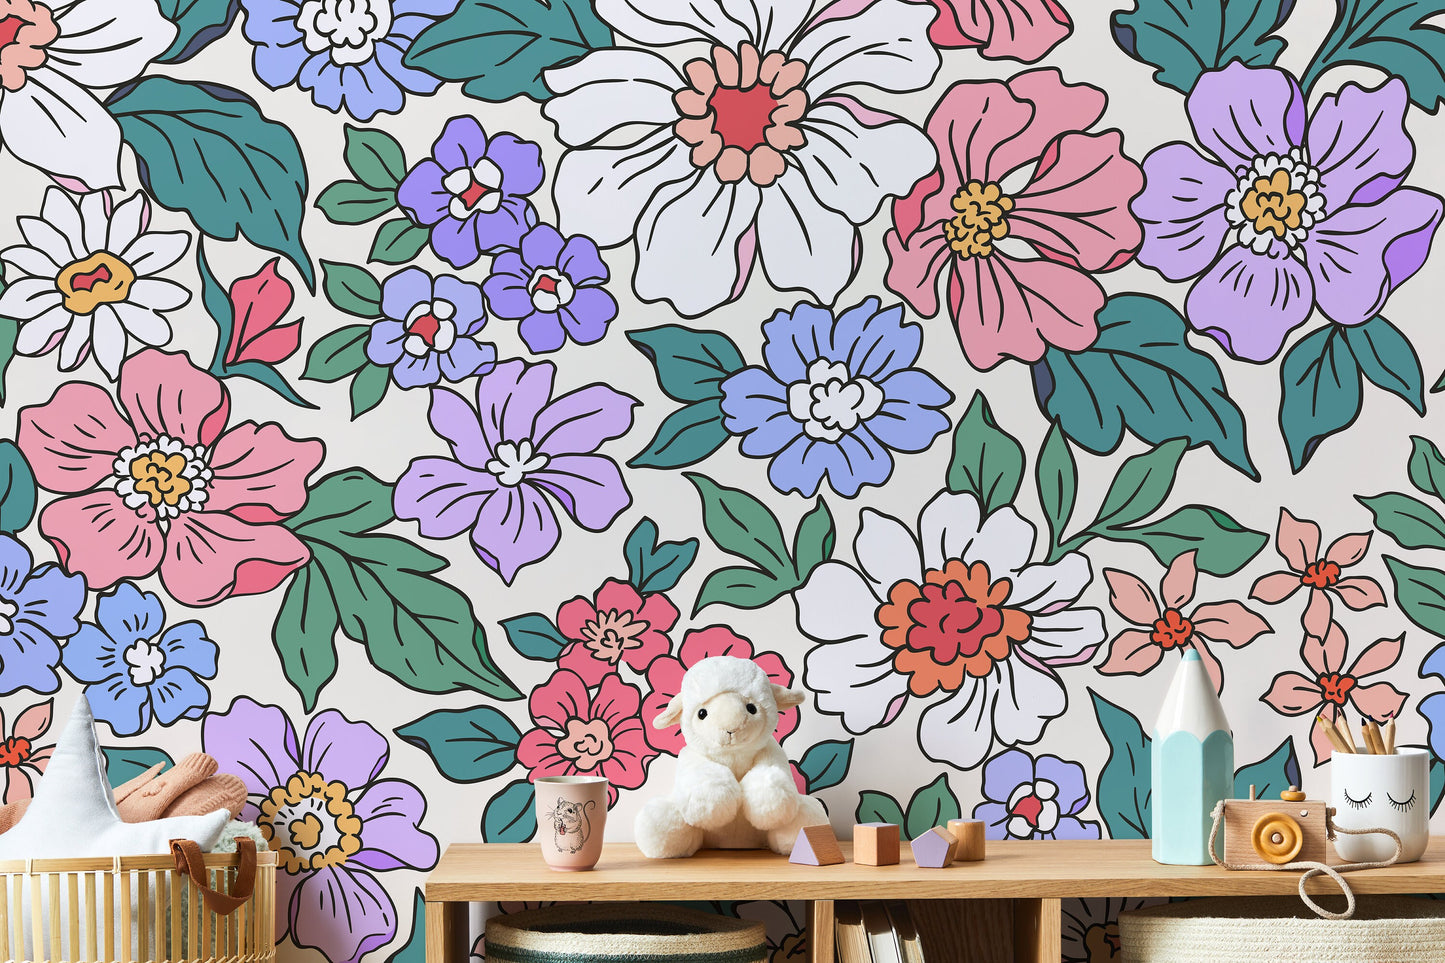 Annete Vintage Meadow Flowers Mural Large Scale Wallpaper Floral Peel and Stick Removable Repositionable or Traditional Pre-pasted - ZADV